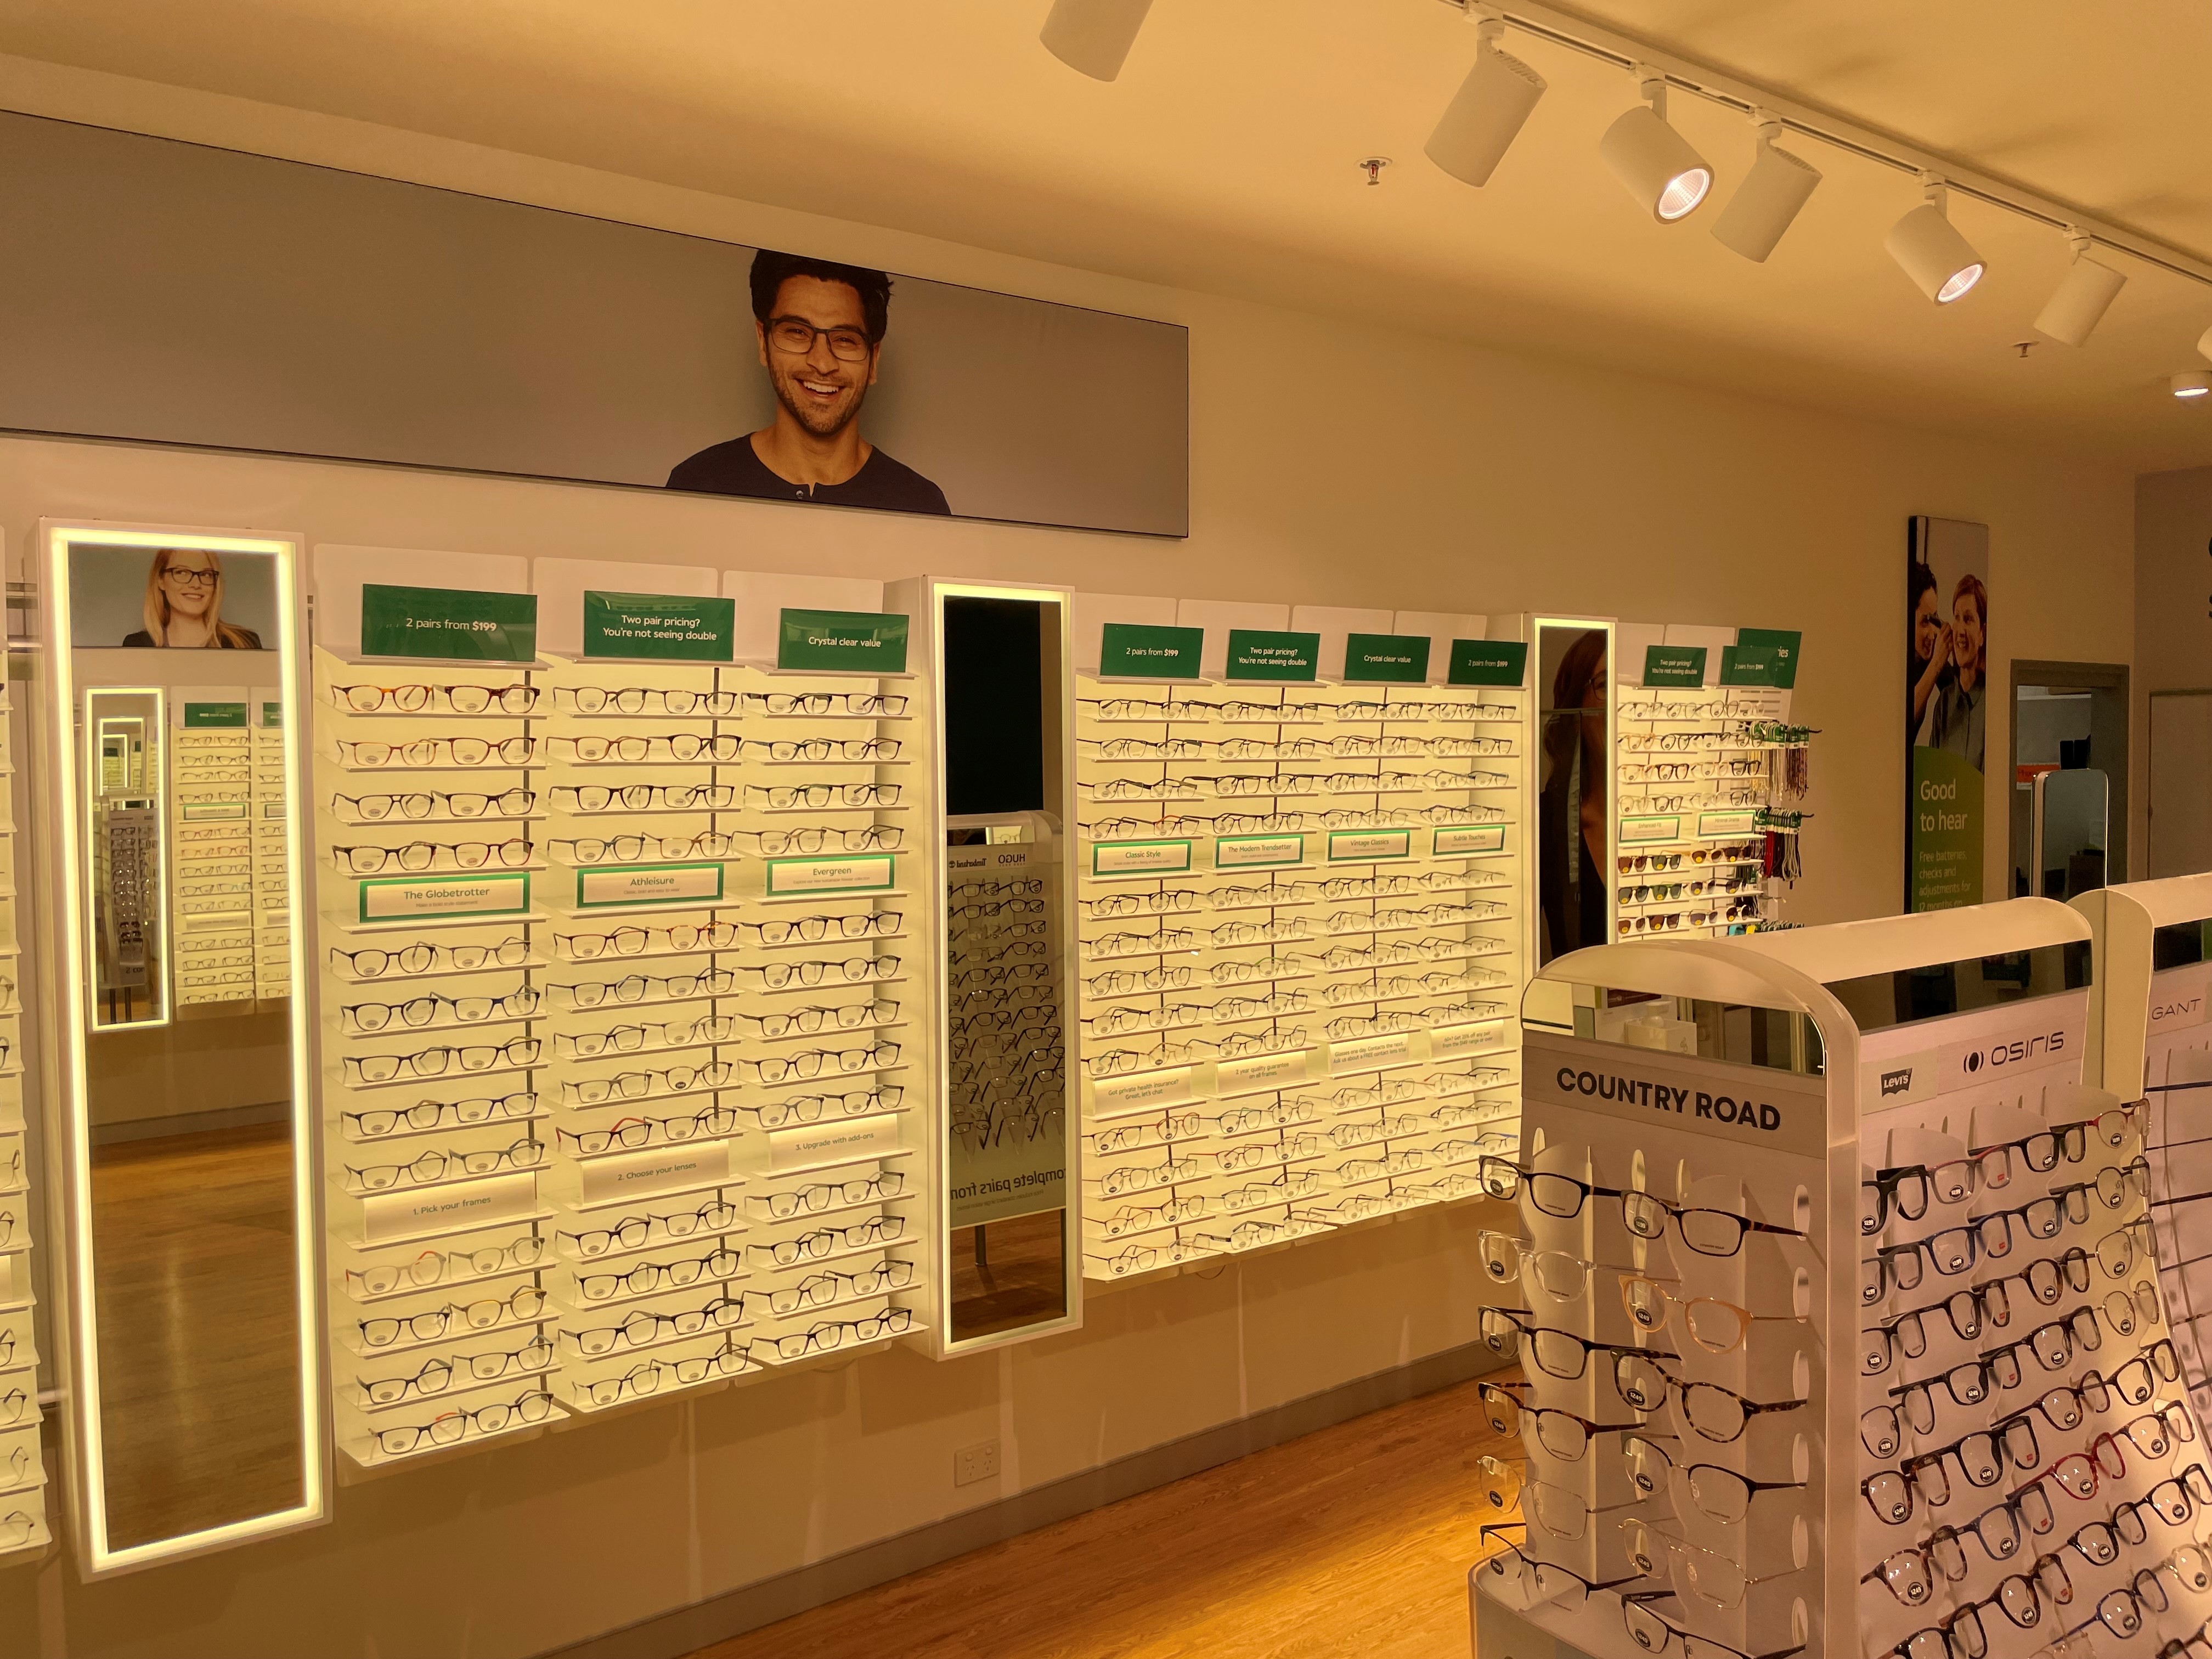 Images Specsavers Optometrists & Audiology - Capalaba Park S/C